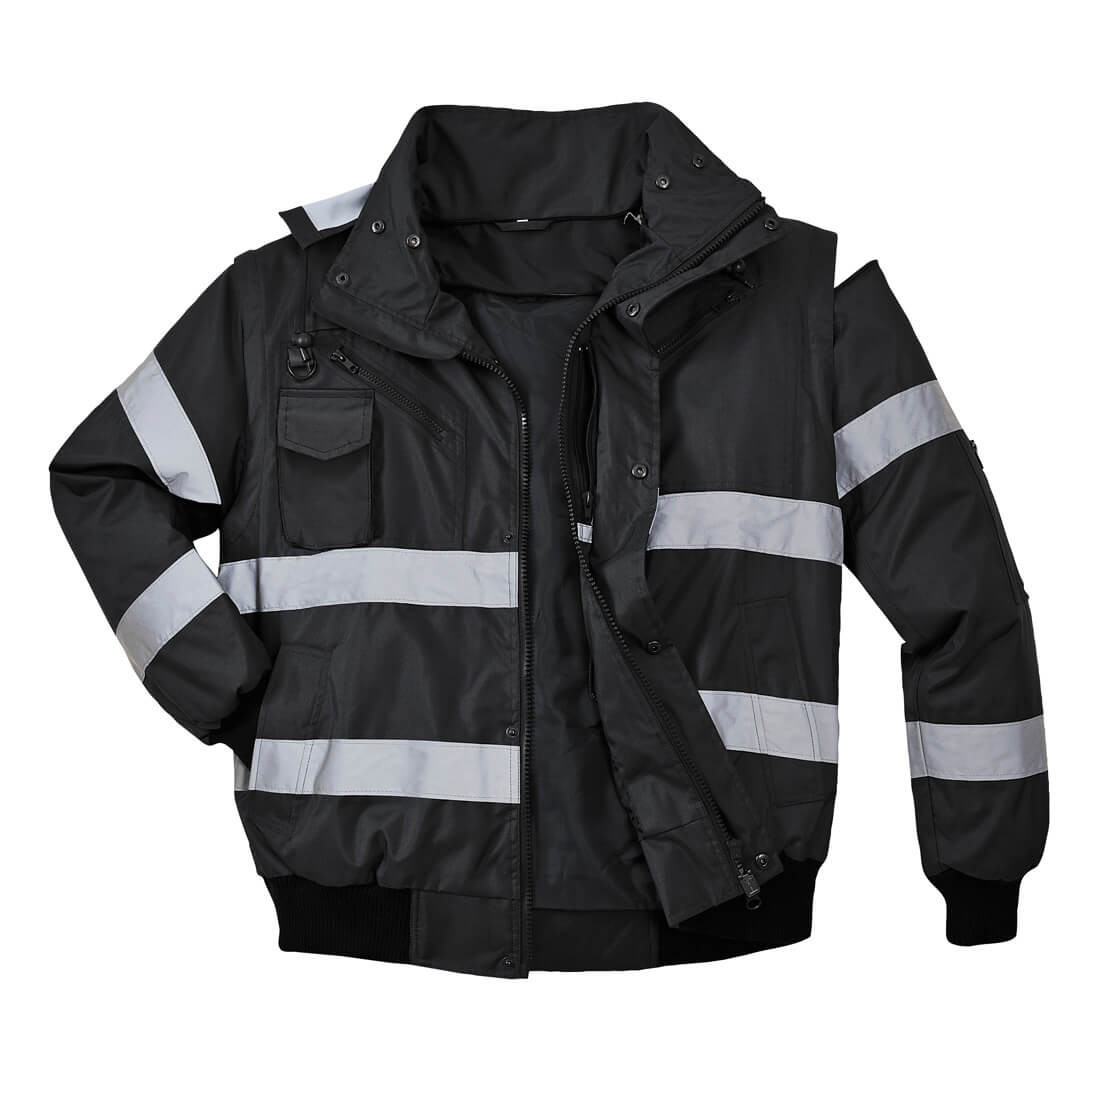 Iona 3 in 1 Bomber Jacket - Safetywear